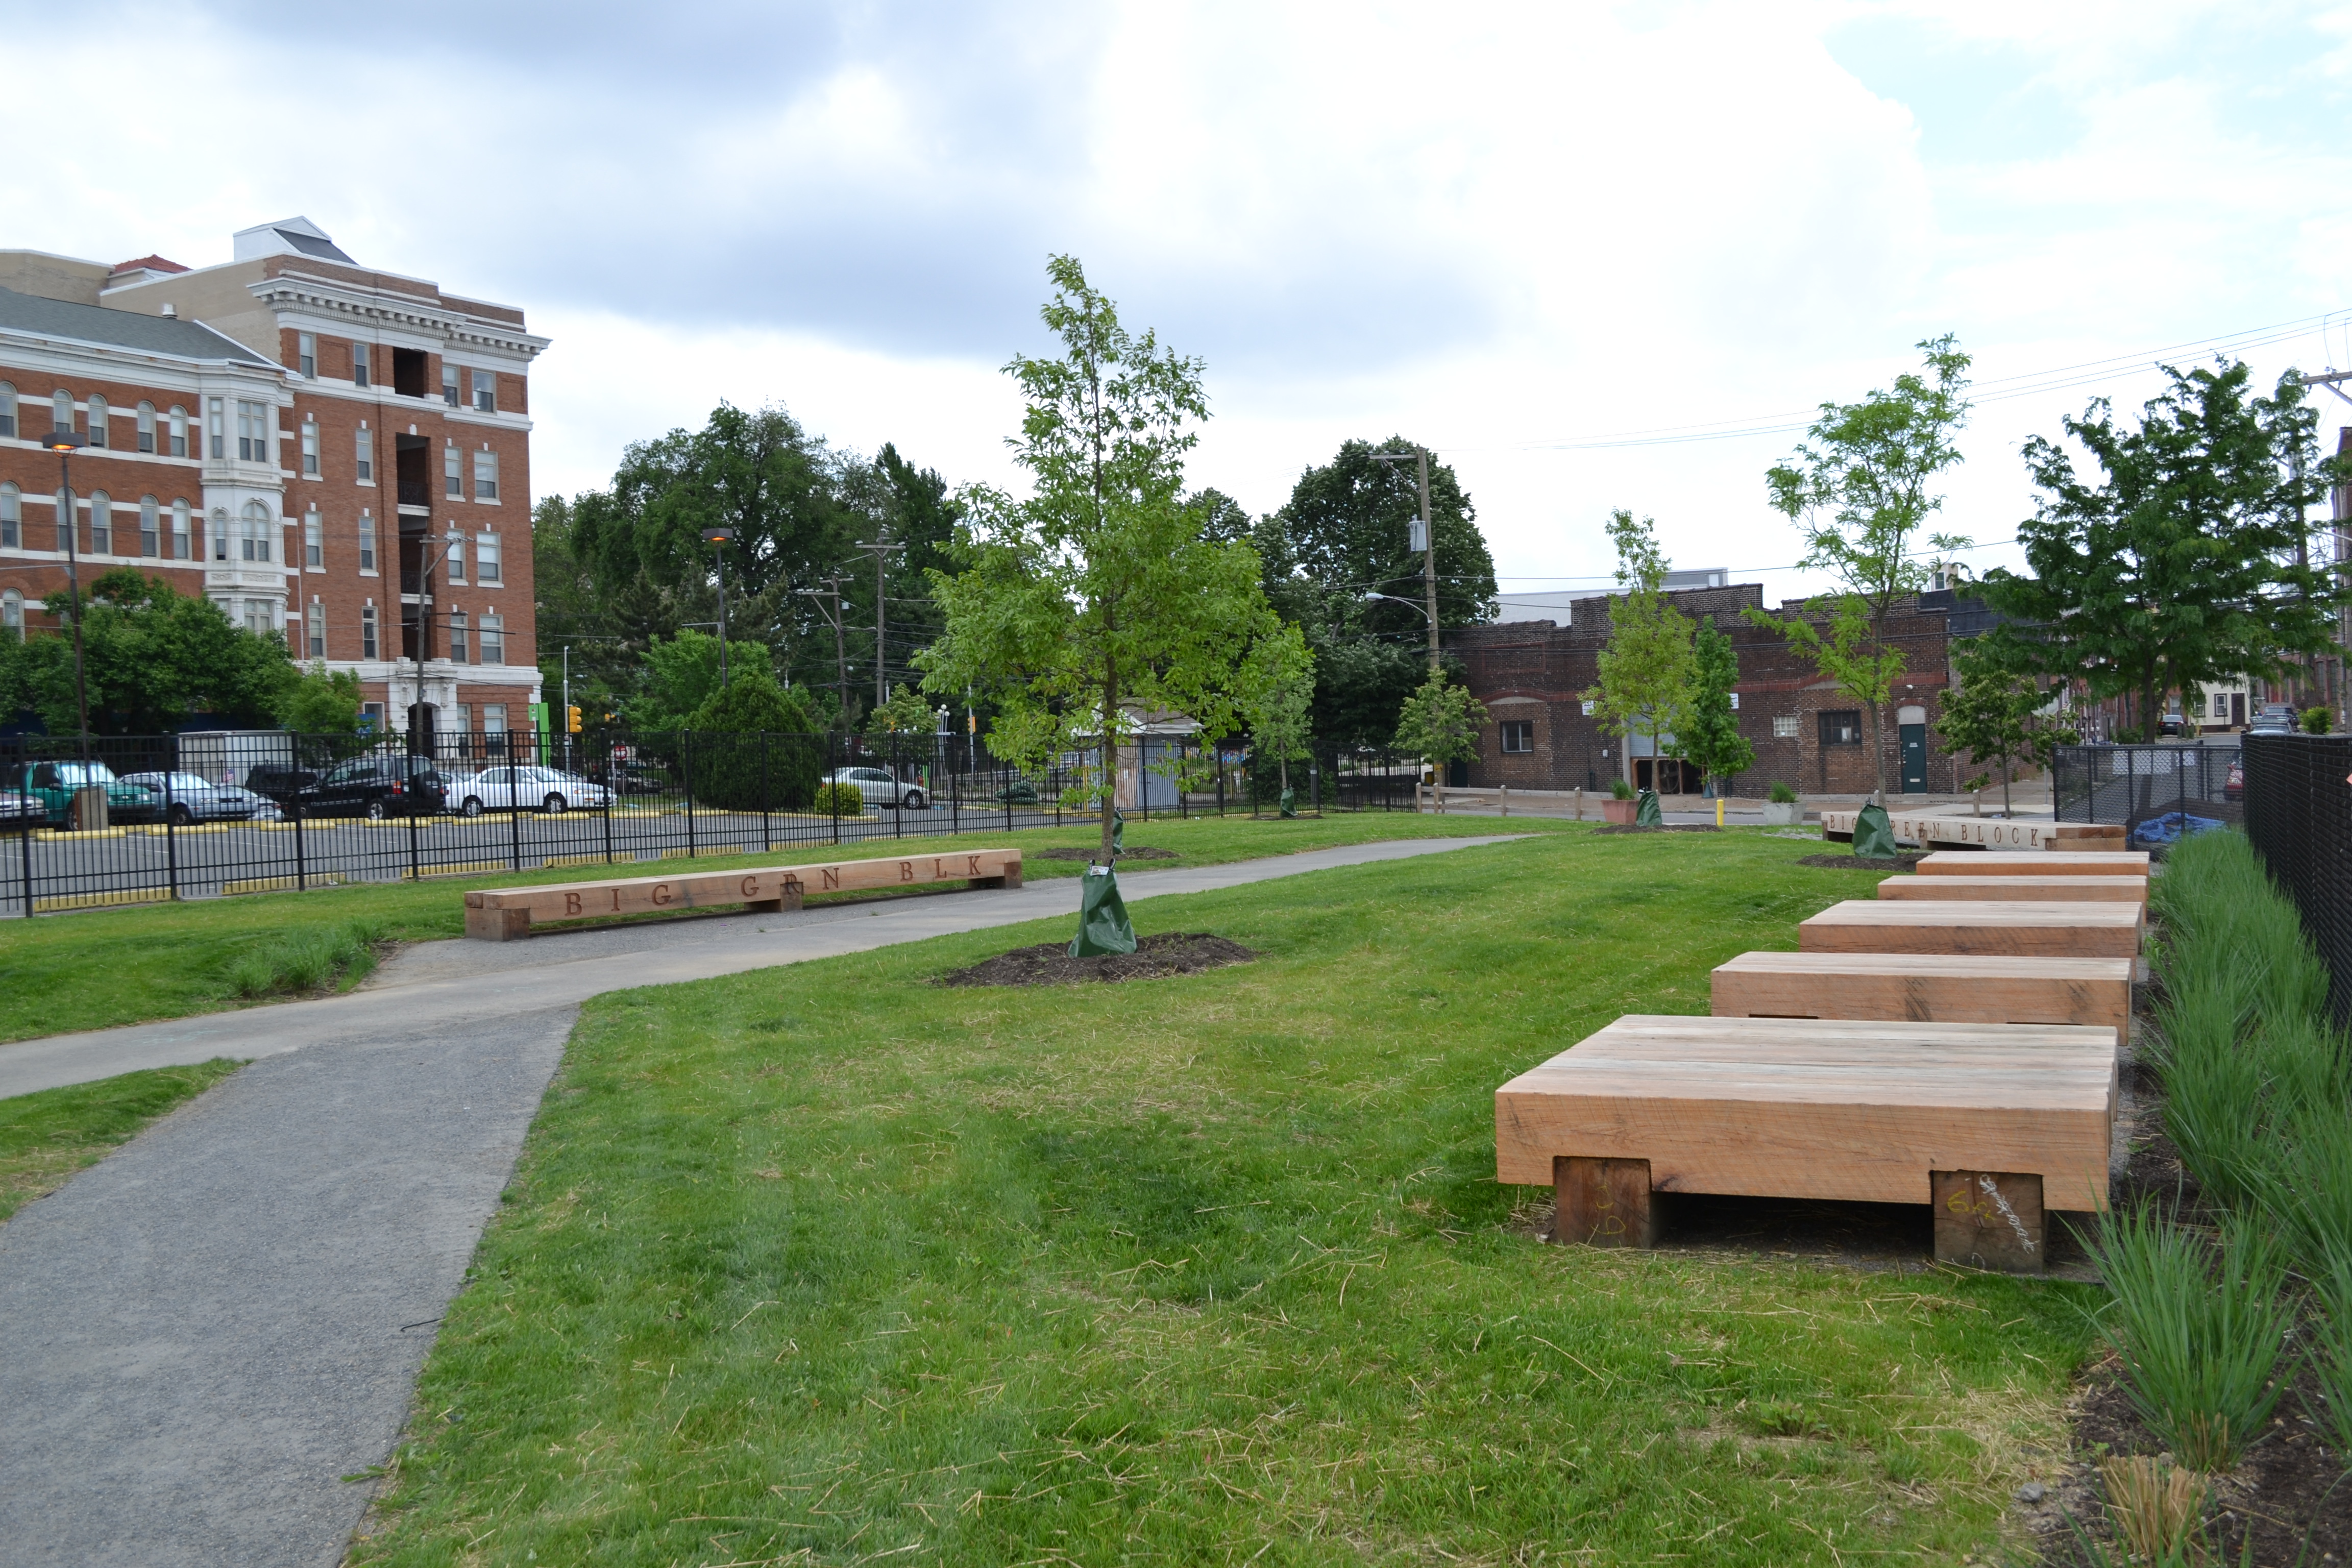 The Big Green Block initiative has created an art-filled greenspace to connect the Shissler Rec Center through neighborhood parks to the Delaware River